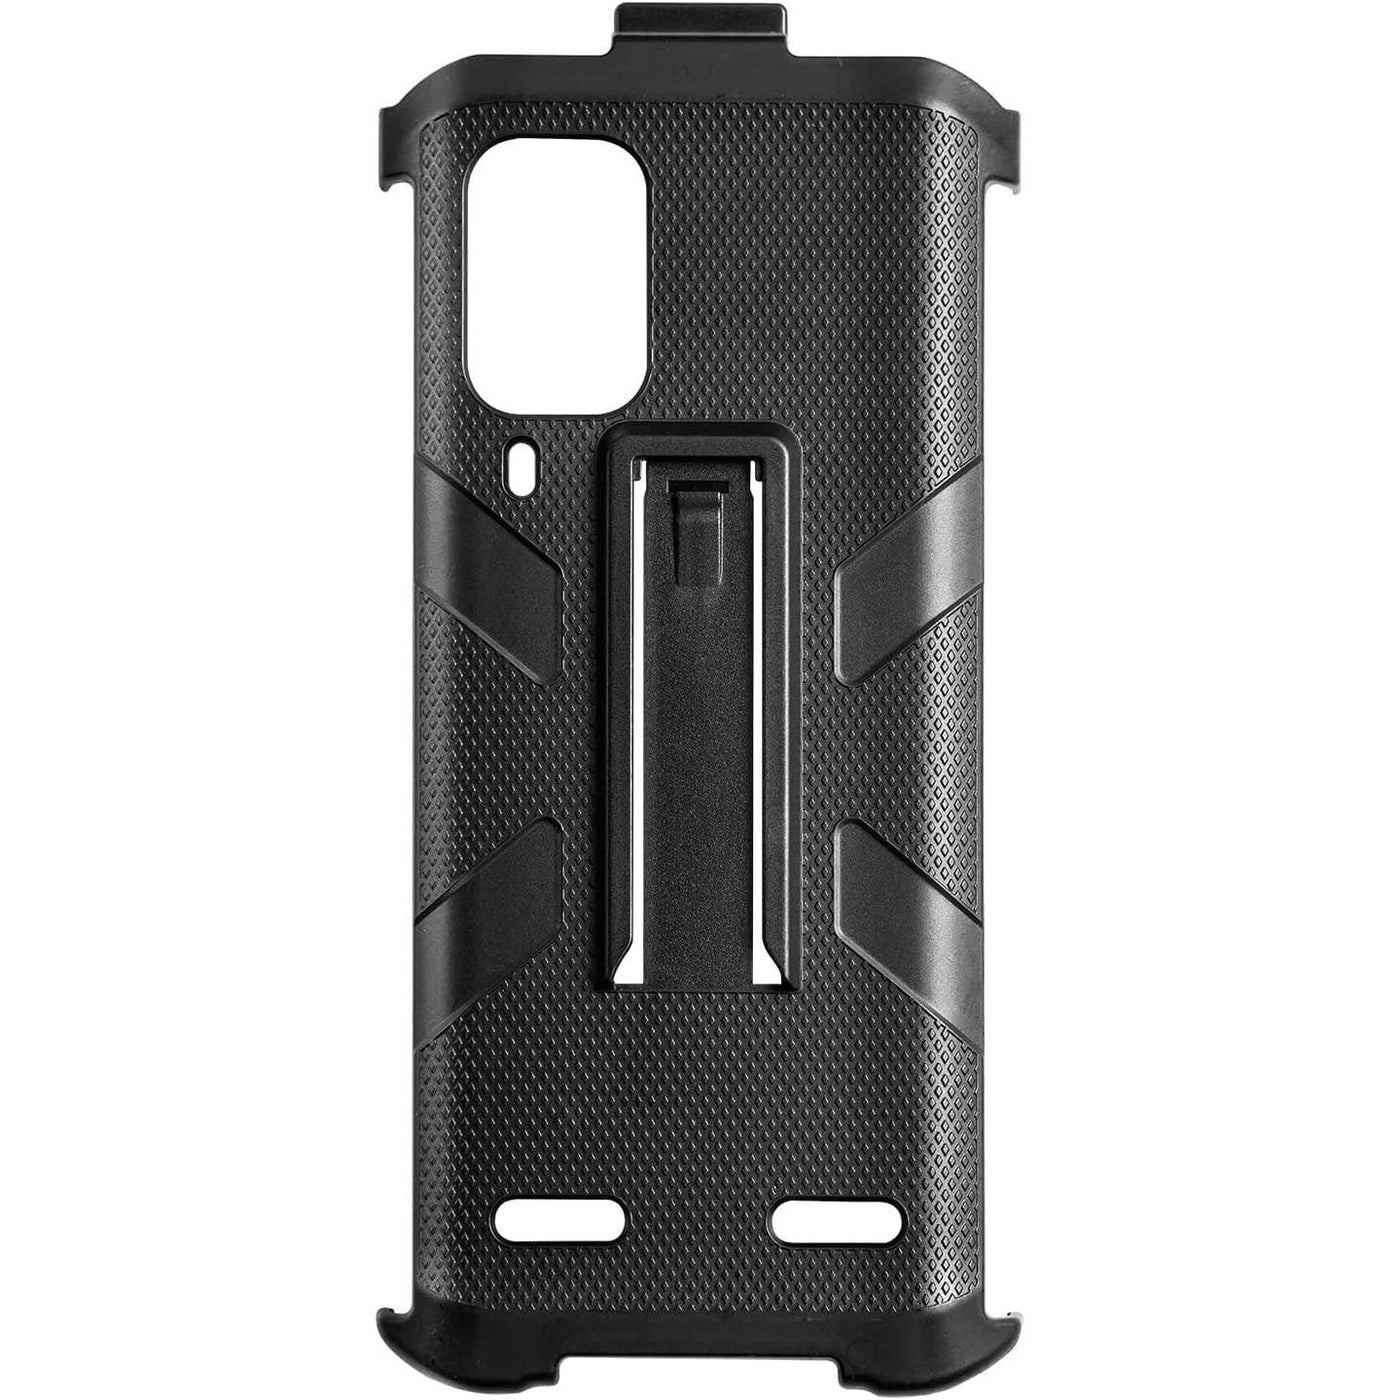 Case for Ulefone Armor 12 Rugged Smartphone with Back Clip Carabiner - Massive Discounts